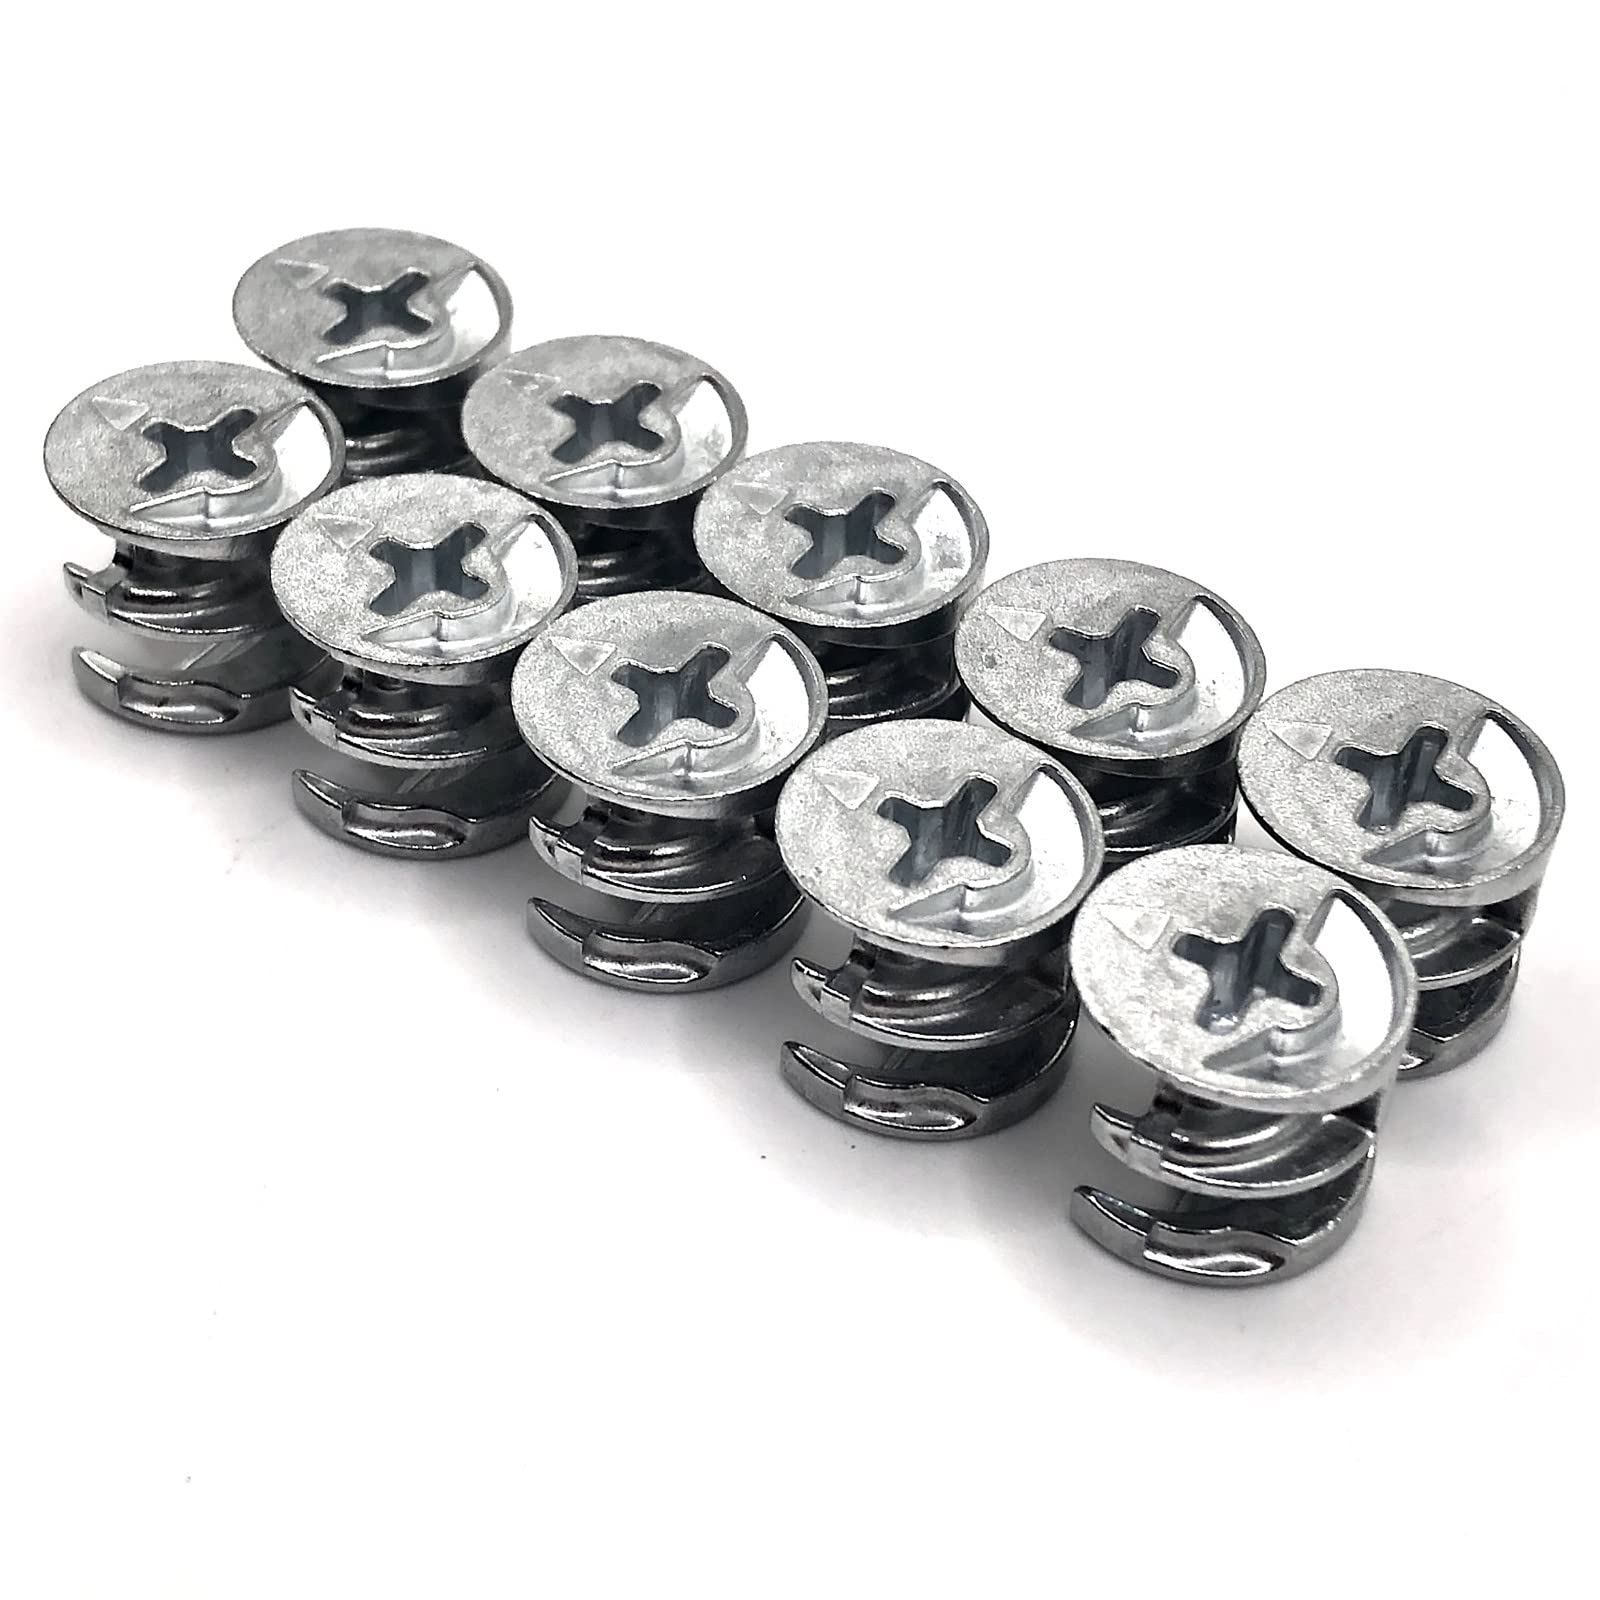 ReplacementScrews Eccentric Cam Lock Nuts Compatible with IKEA Part 113434 (Pack of 10)